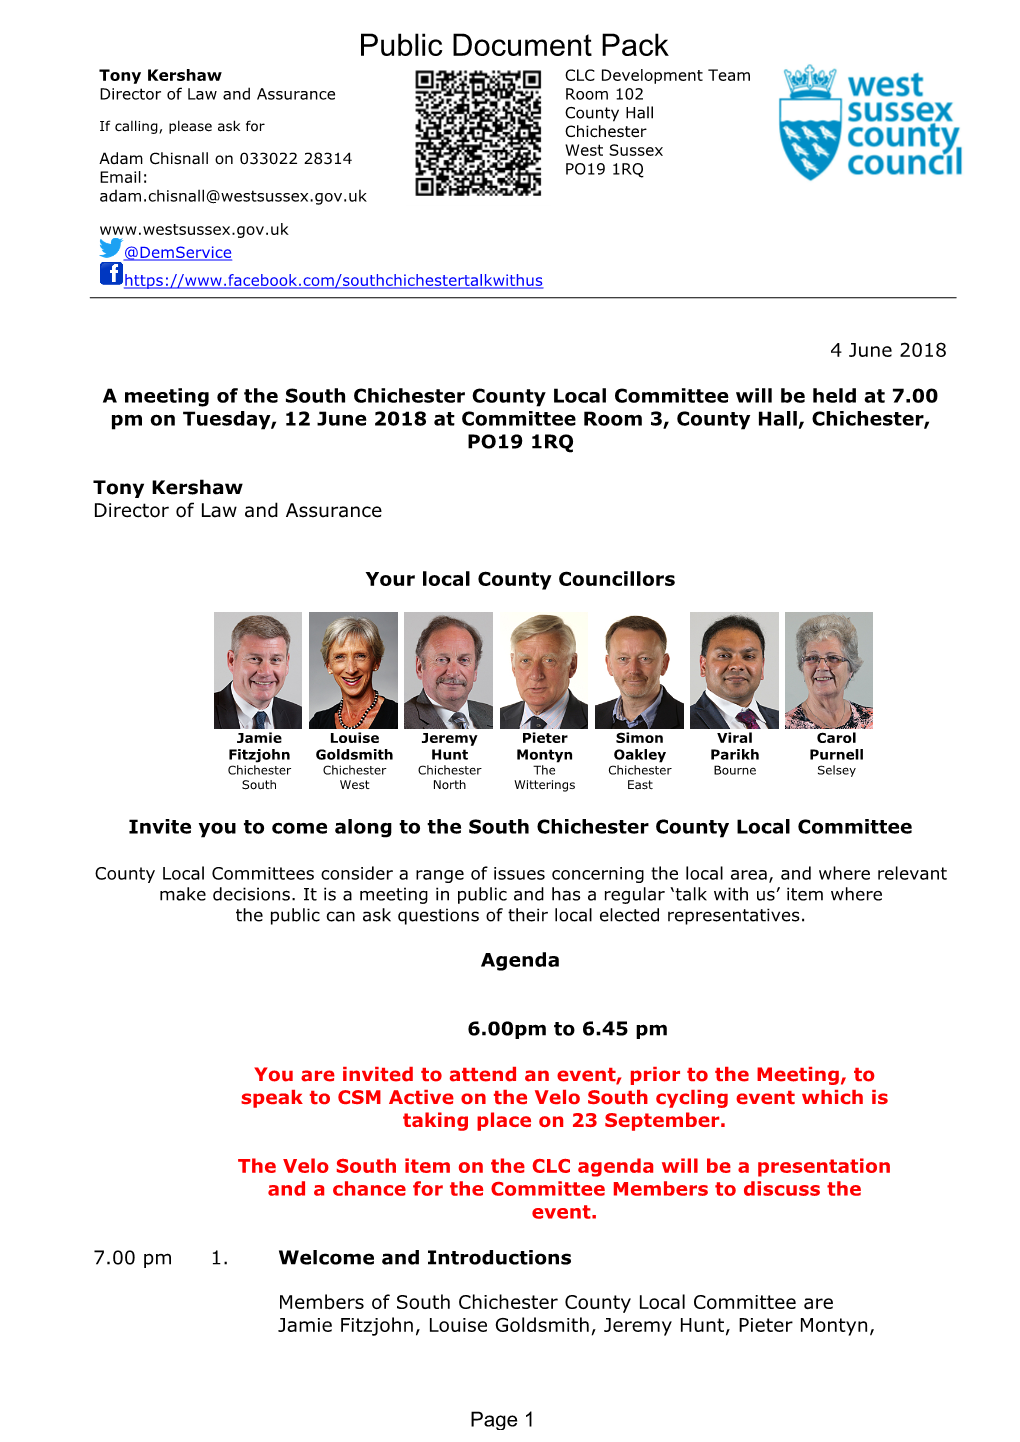 (Public Pack)Agenda Document for South Chichester County Local